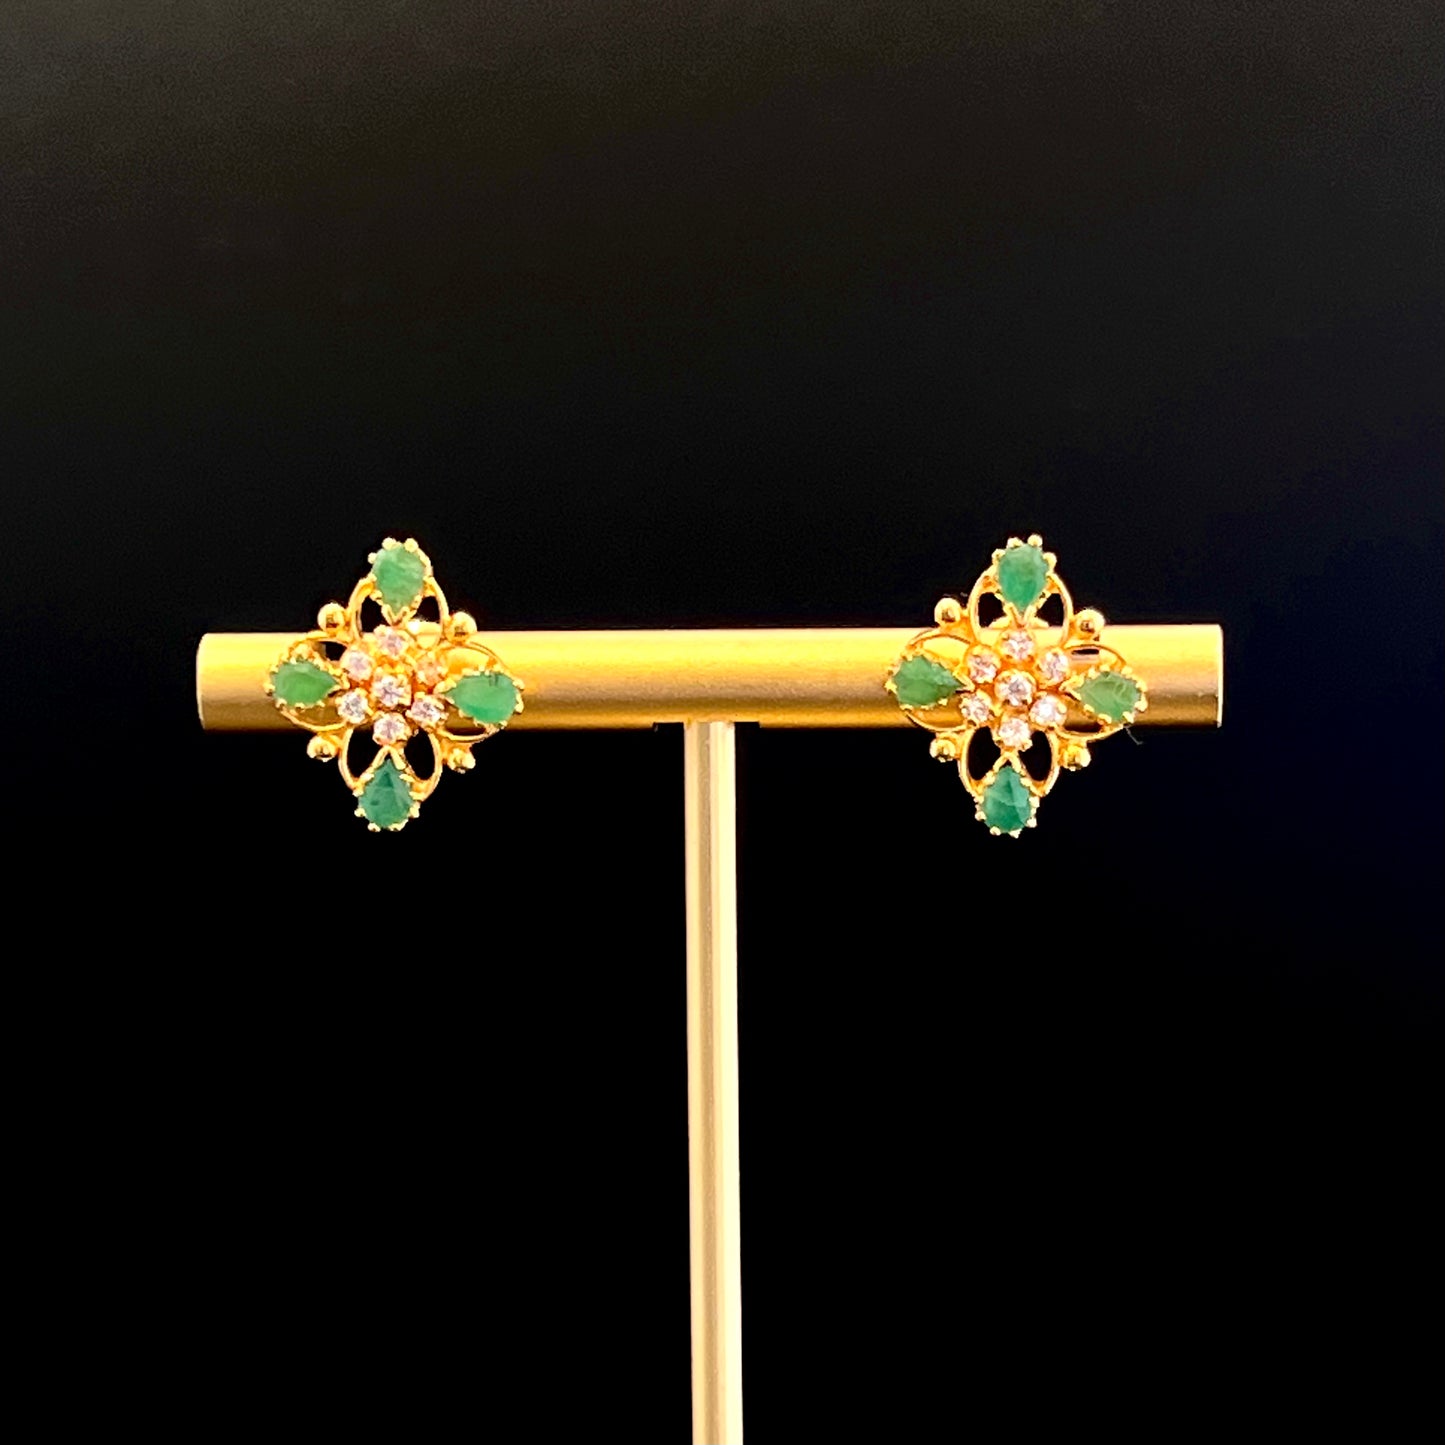 Diamond-Shape Earrings with Emerald and CZ Touch